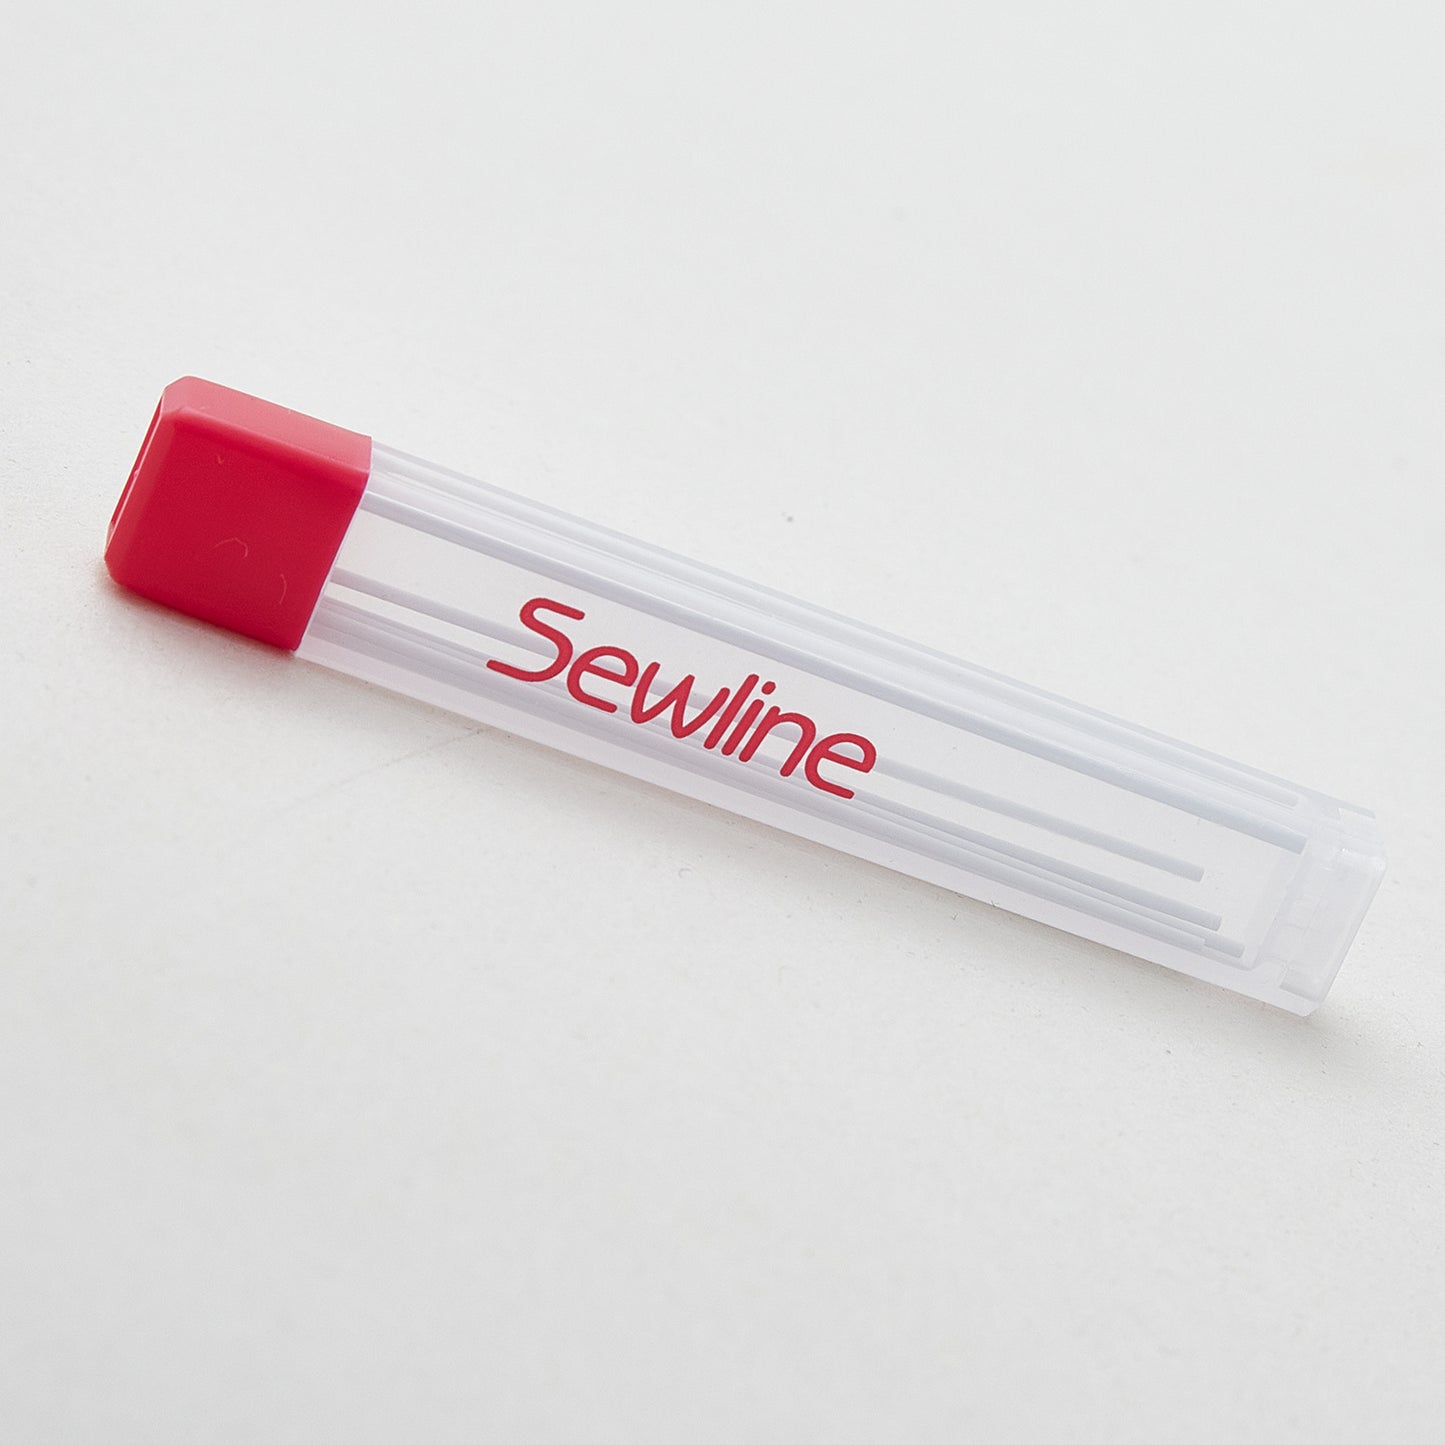 White Fabric Pencil Lead 0.9mm Refills from Sewline Primary Image